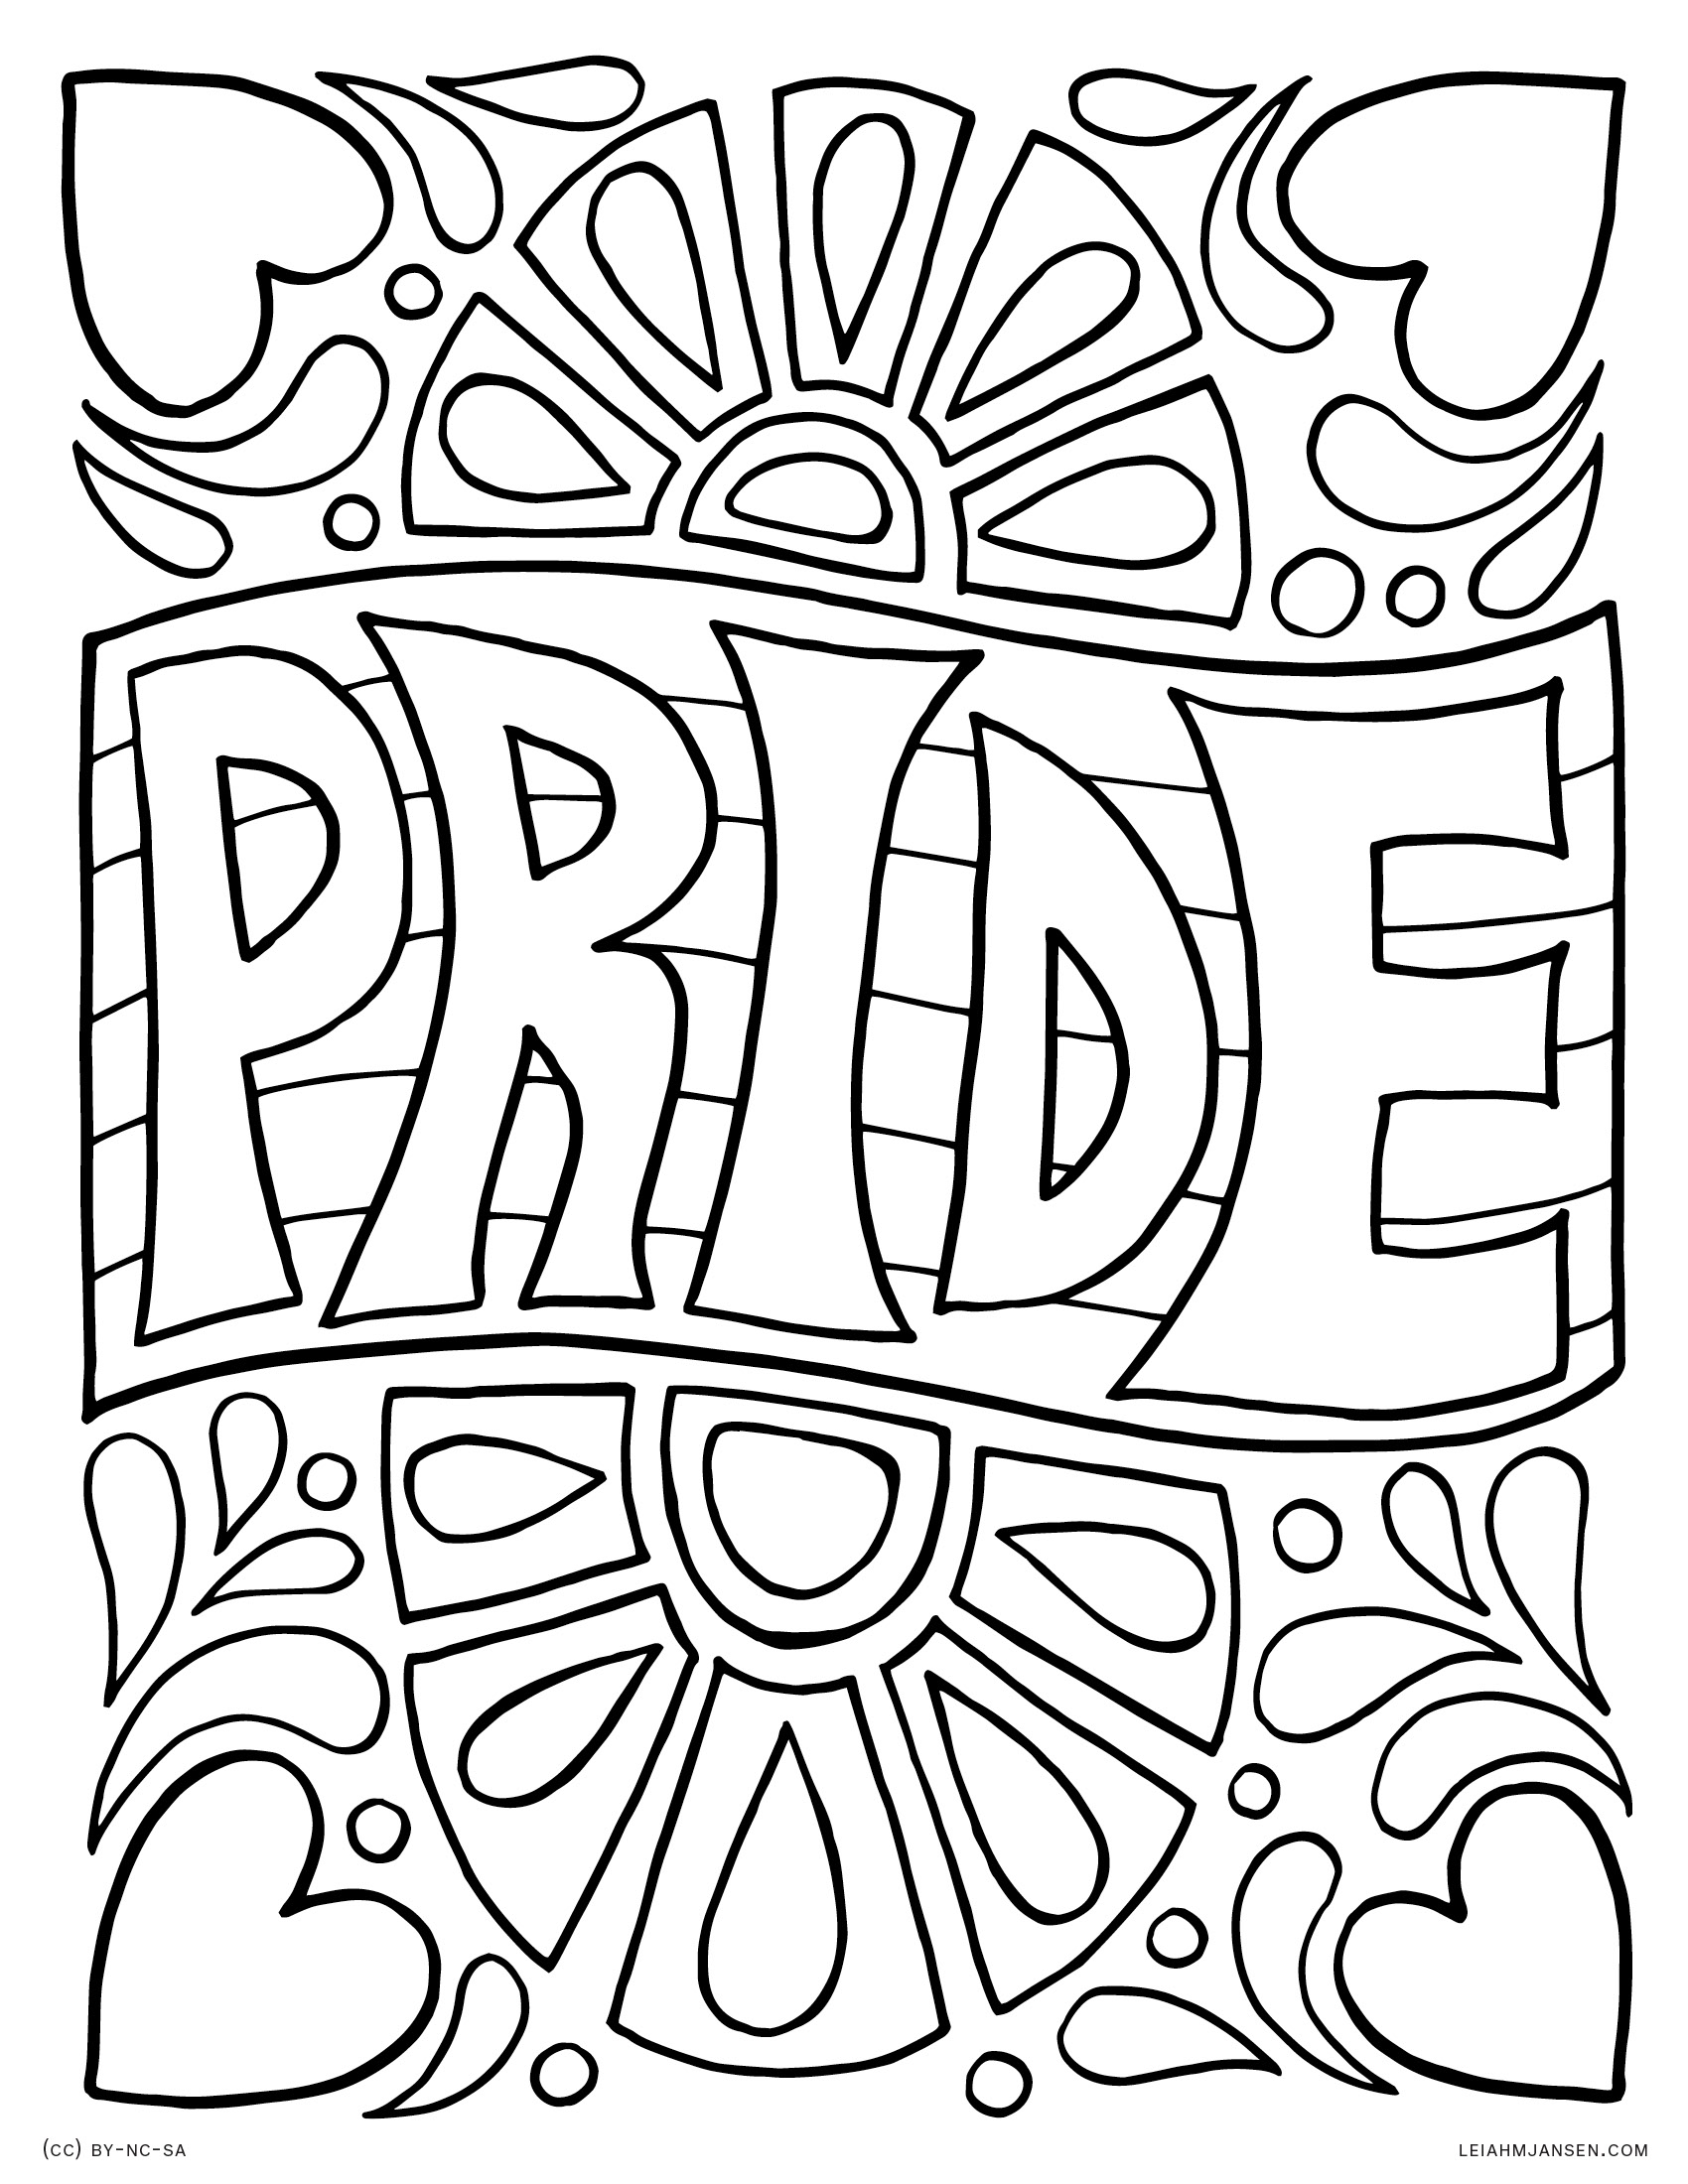 Pride Coloring Pages at Free printable colorings